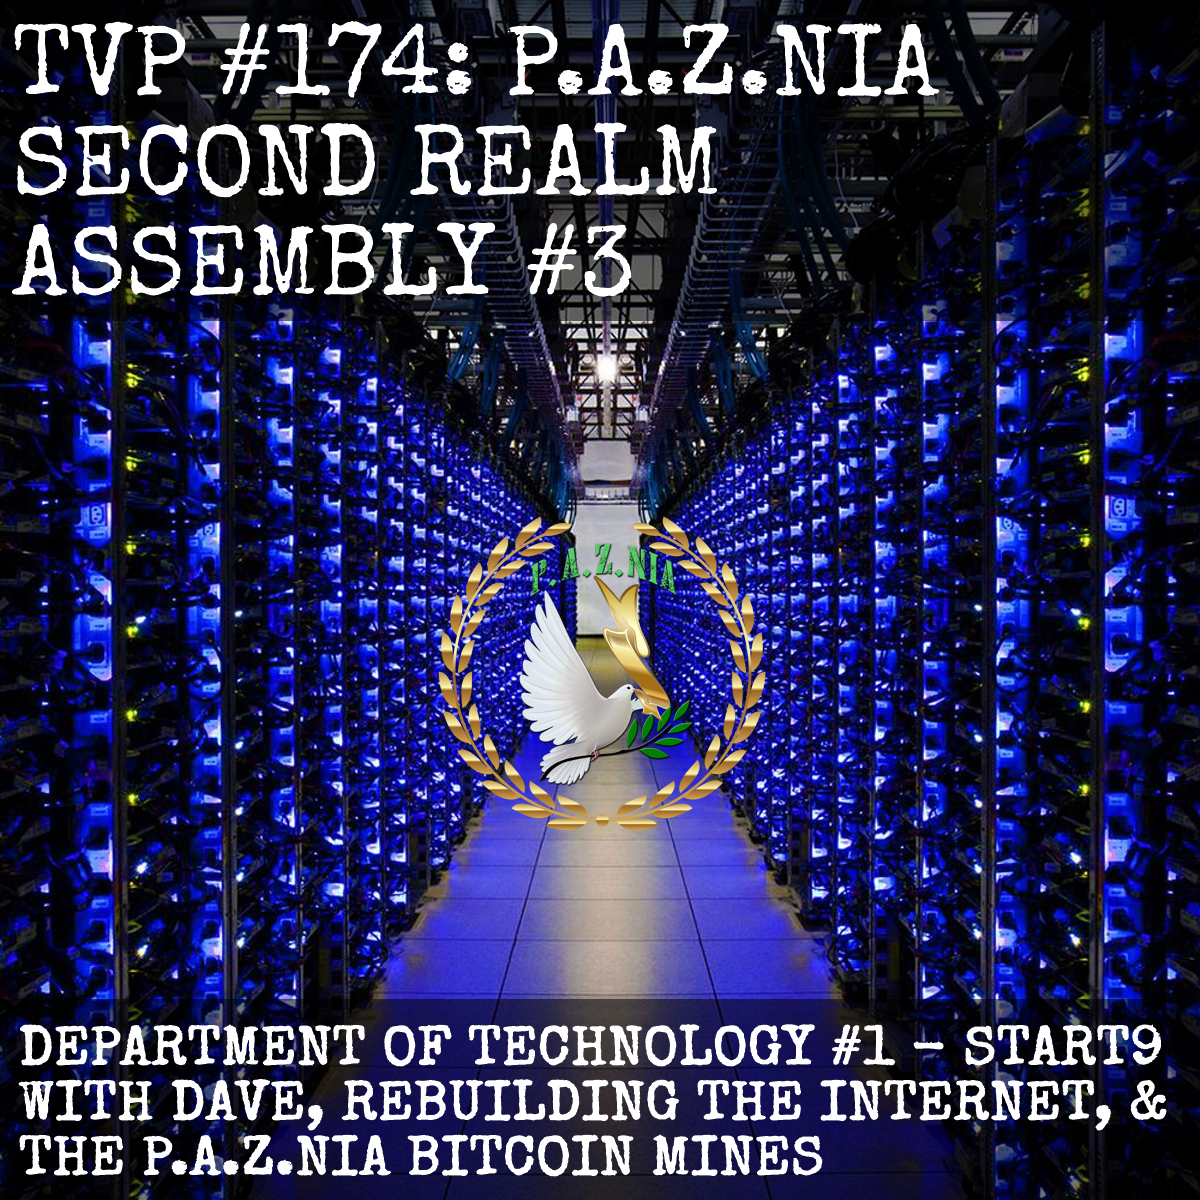 TVP #174: P.A.Z.NIA Second Realm Assembly #3 (Department of Technology #1 — Start9, Rebuilding The Internet, & The P.A.Z.NIA Bitcoin Mines)